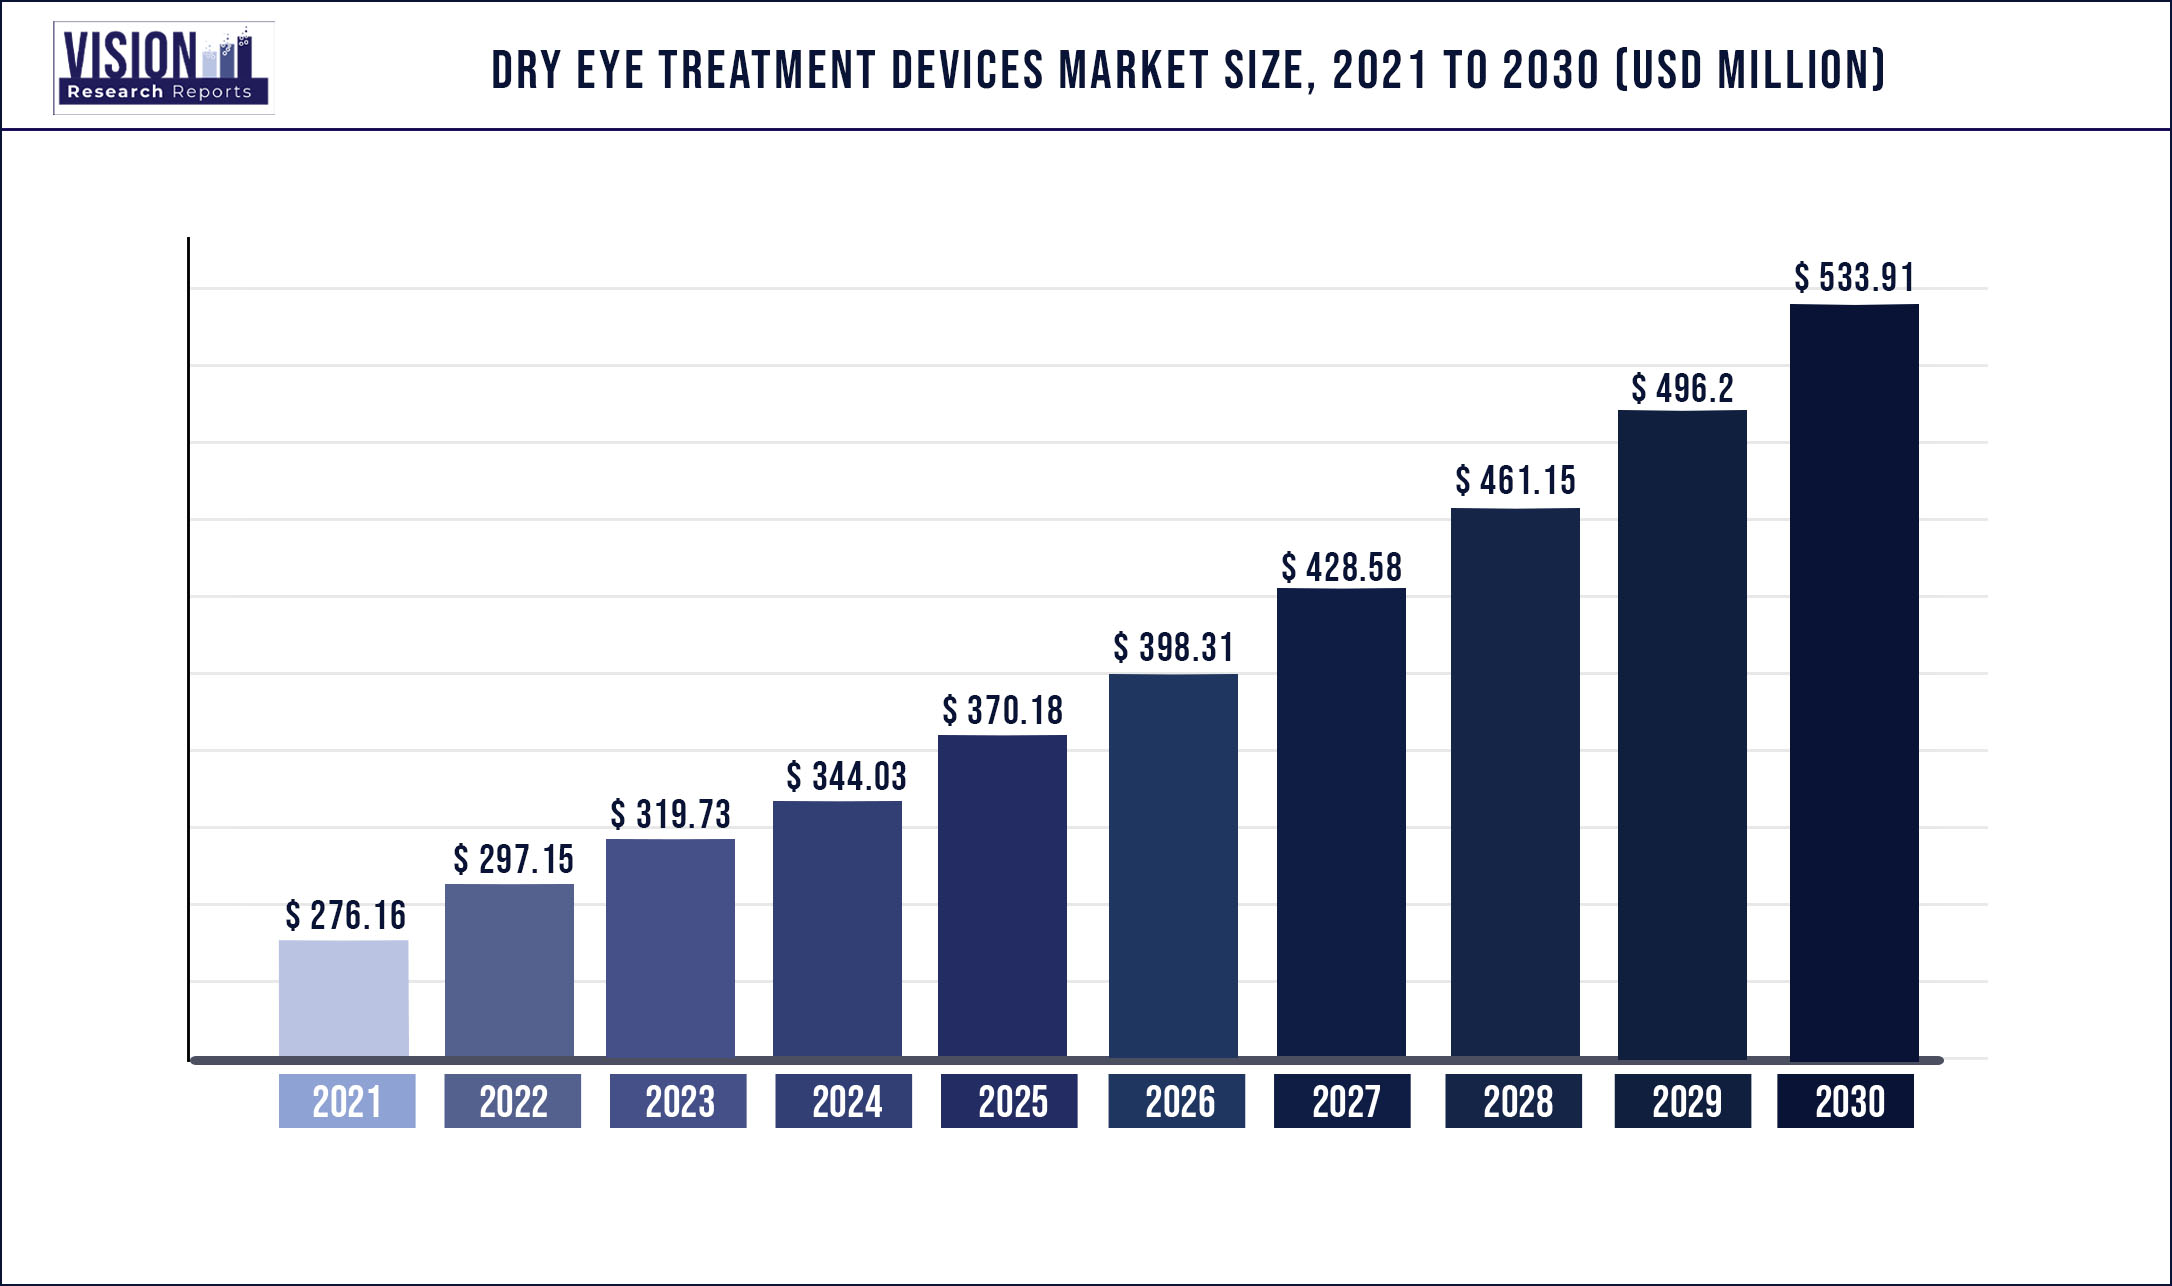 Dry Eye Treatment Devices Market Size 2021 to 2030